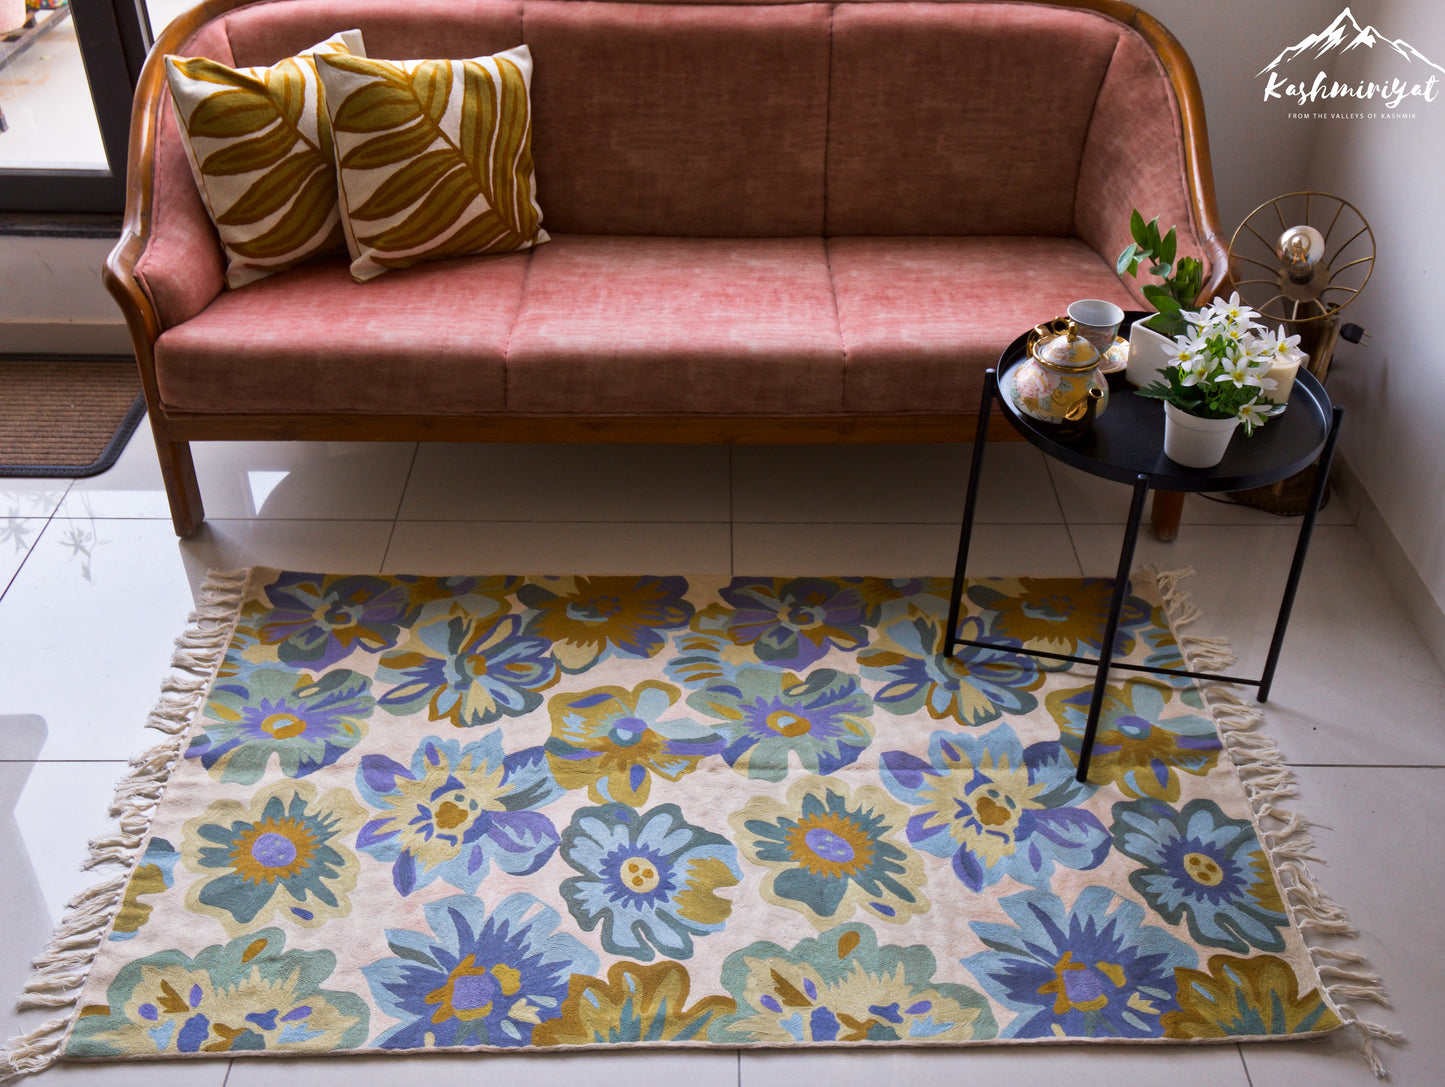 Floral Symphony Hand Embroidered Chainstitch Rug